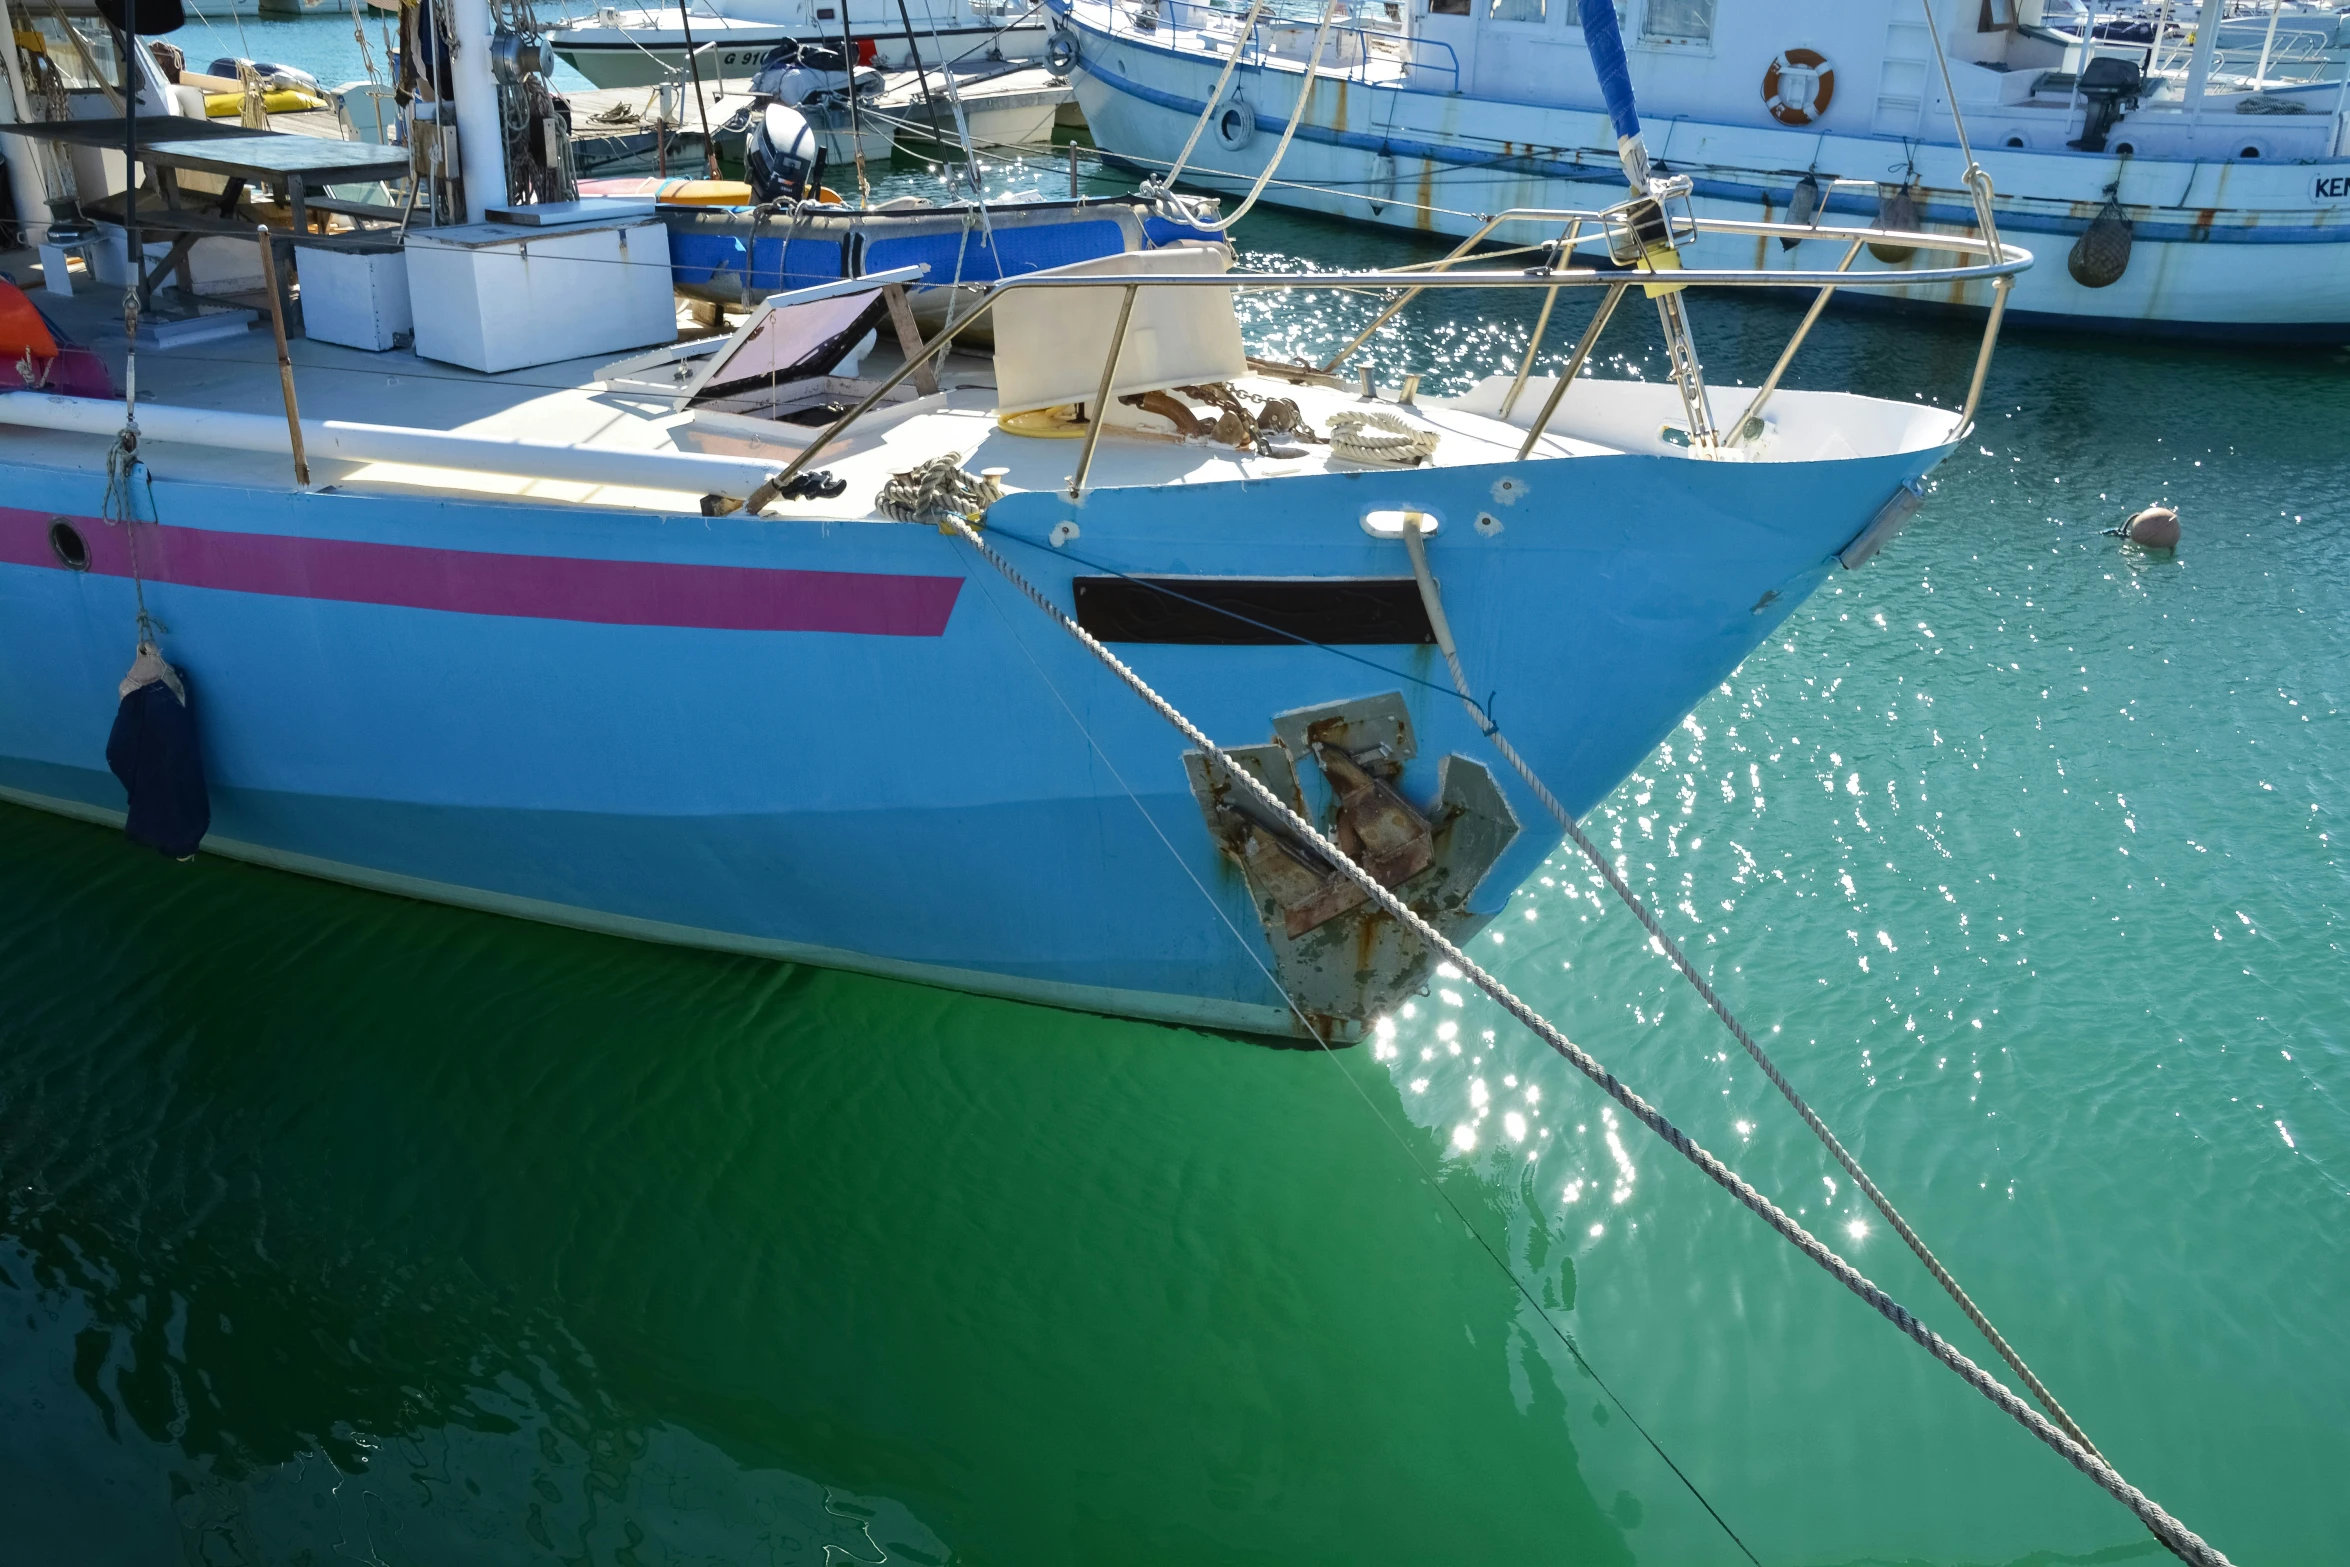 the colorful boat sits in the harbor with many others